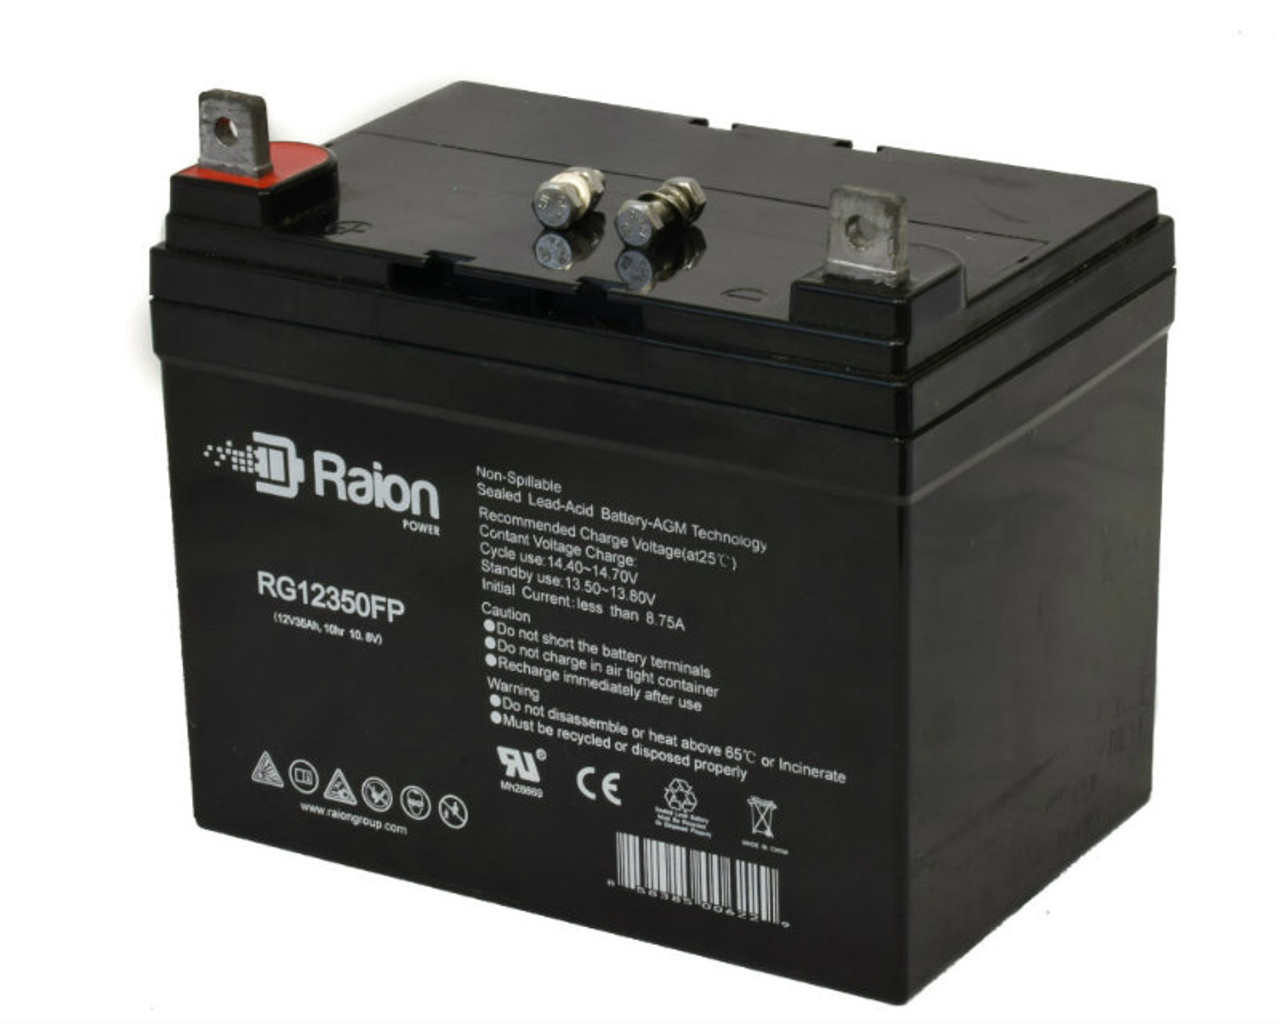 Raion Power Replacement 12V 35Ah RG12350FP Mobility Scooter Battery for Leisure Lift Scout M Series M1 - M1 PBR - M2